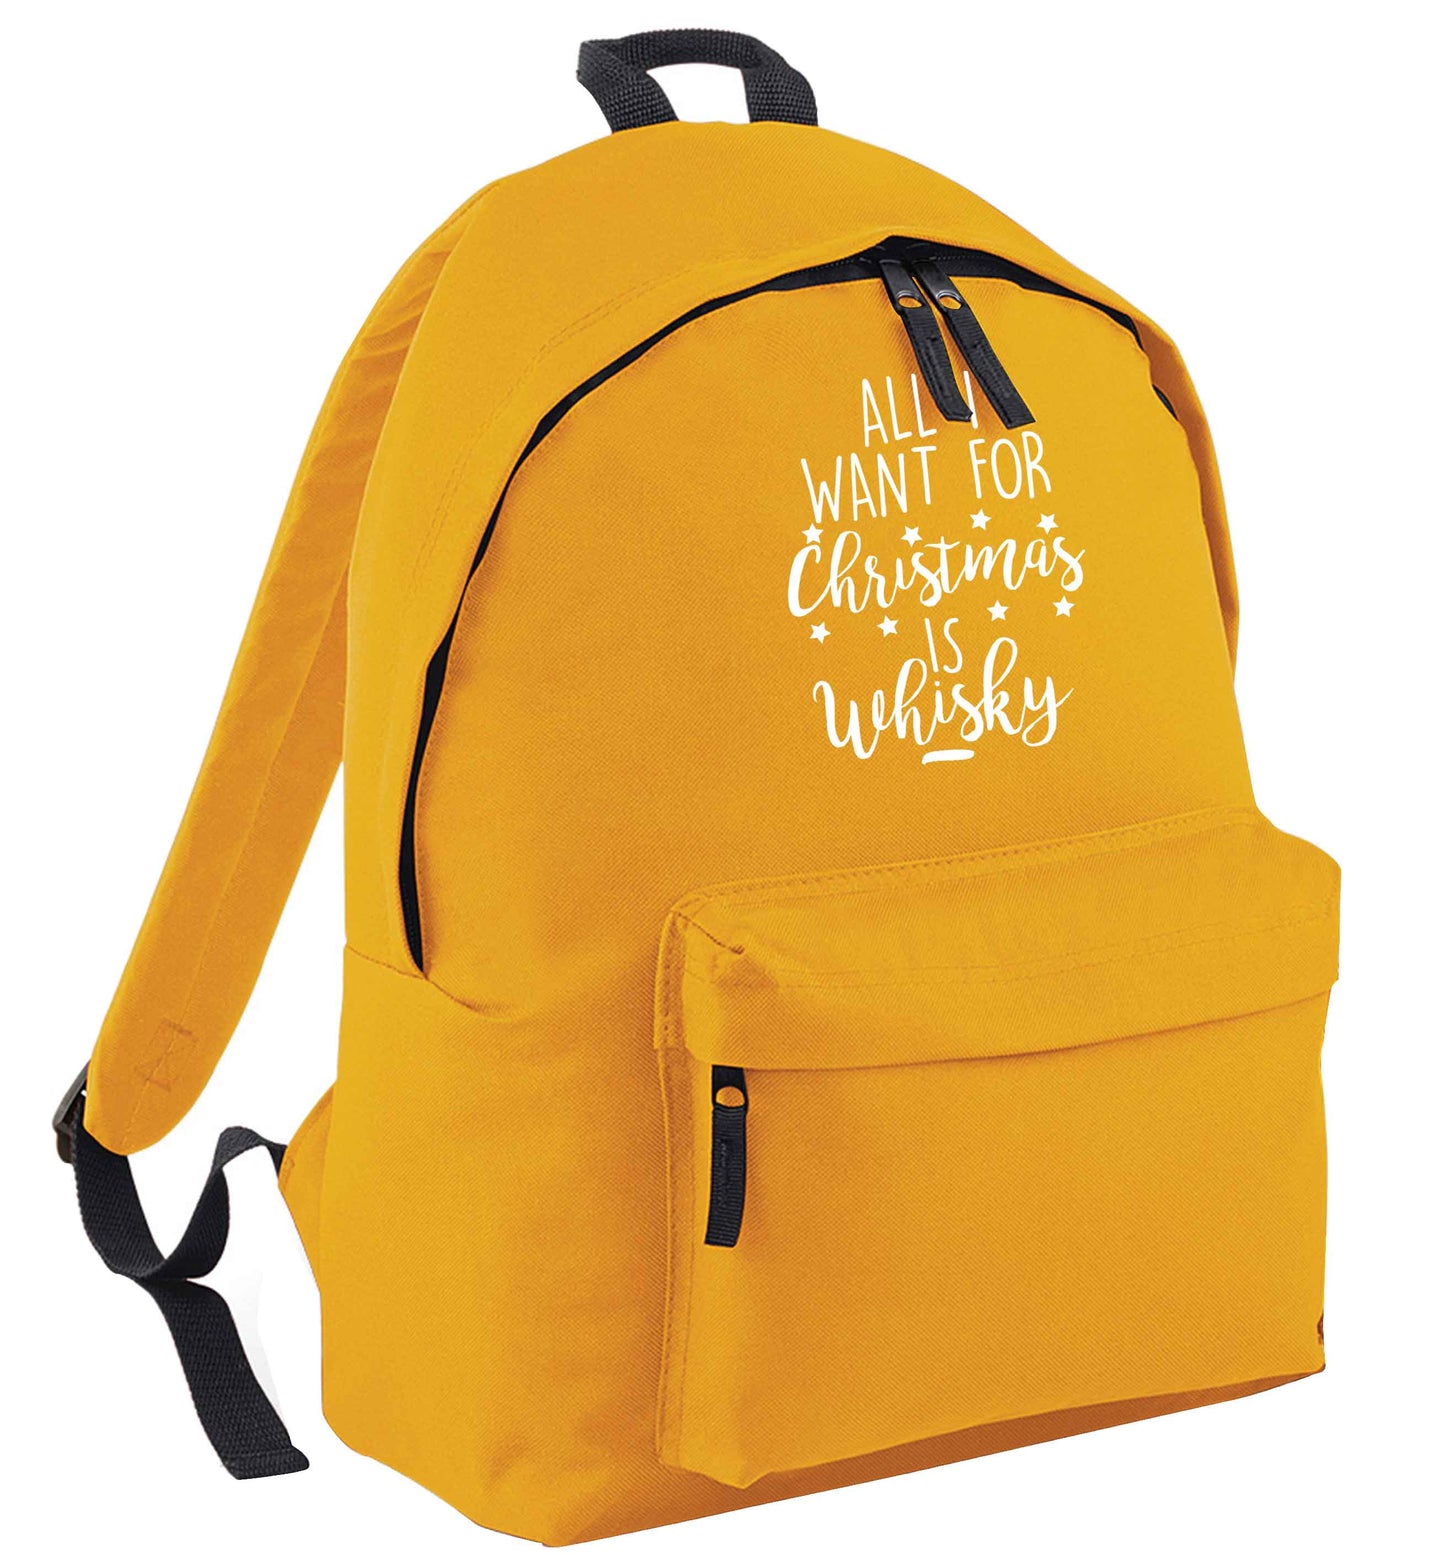 All I want for Christmas is whisky mustard adults backpack